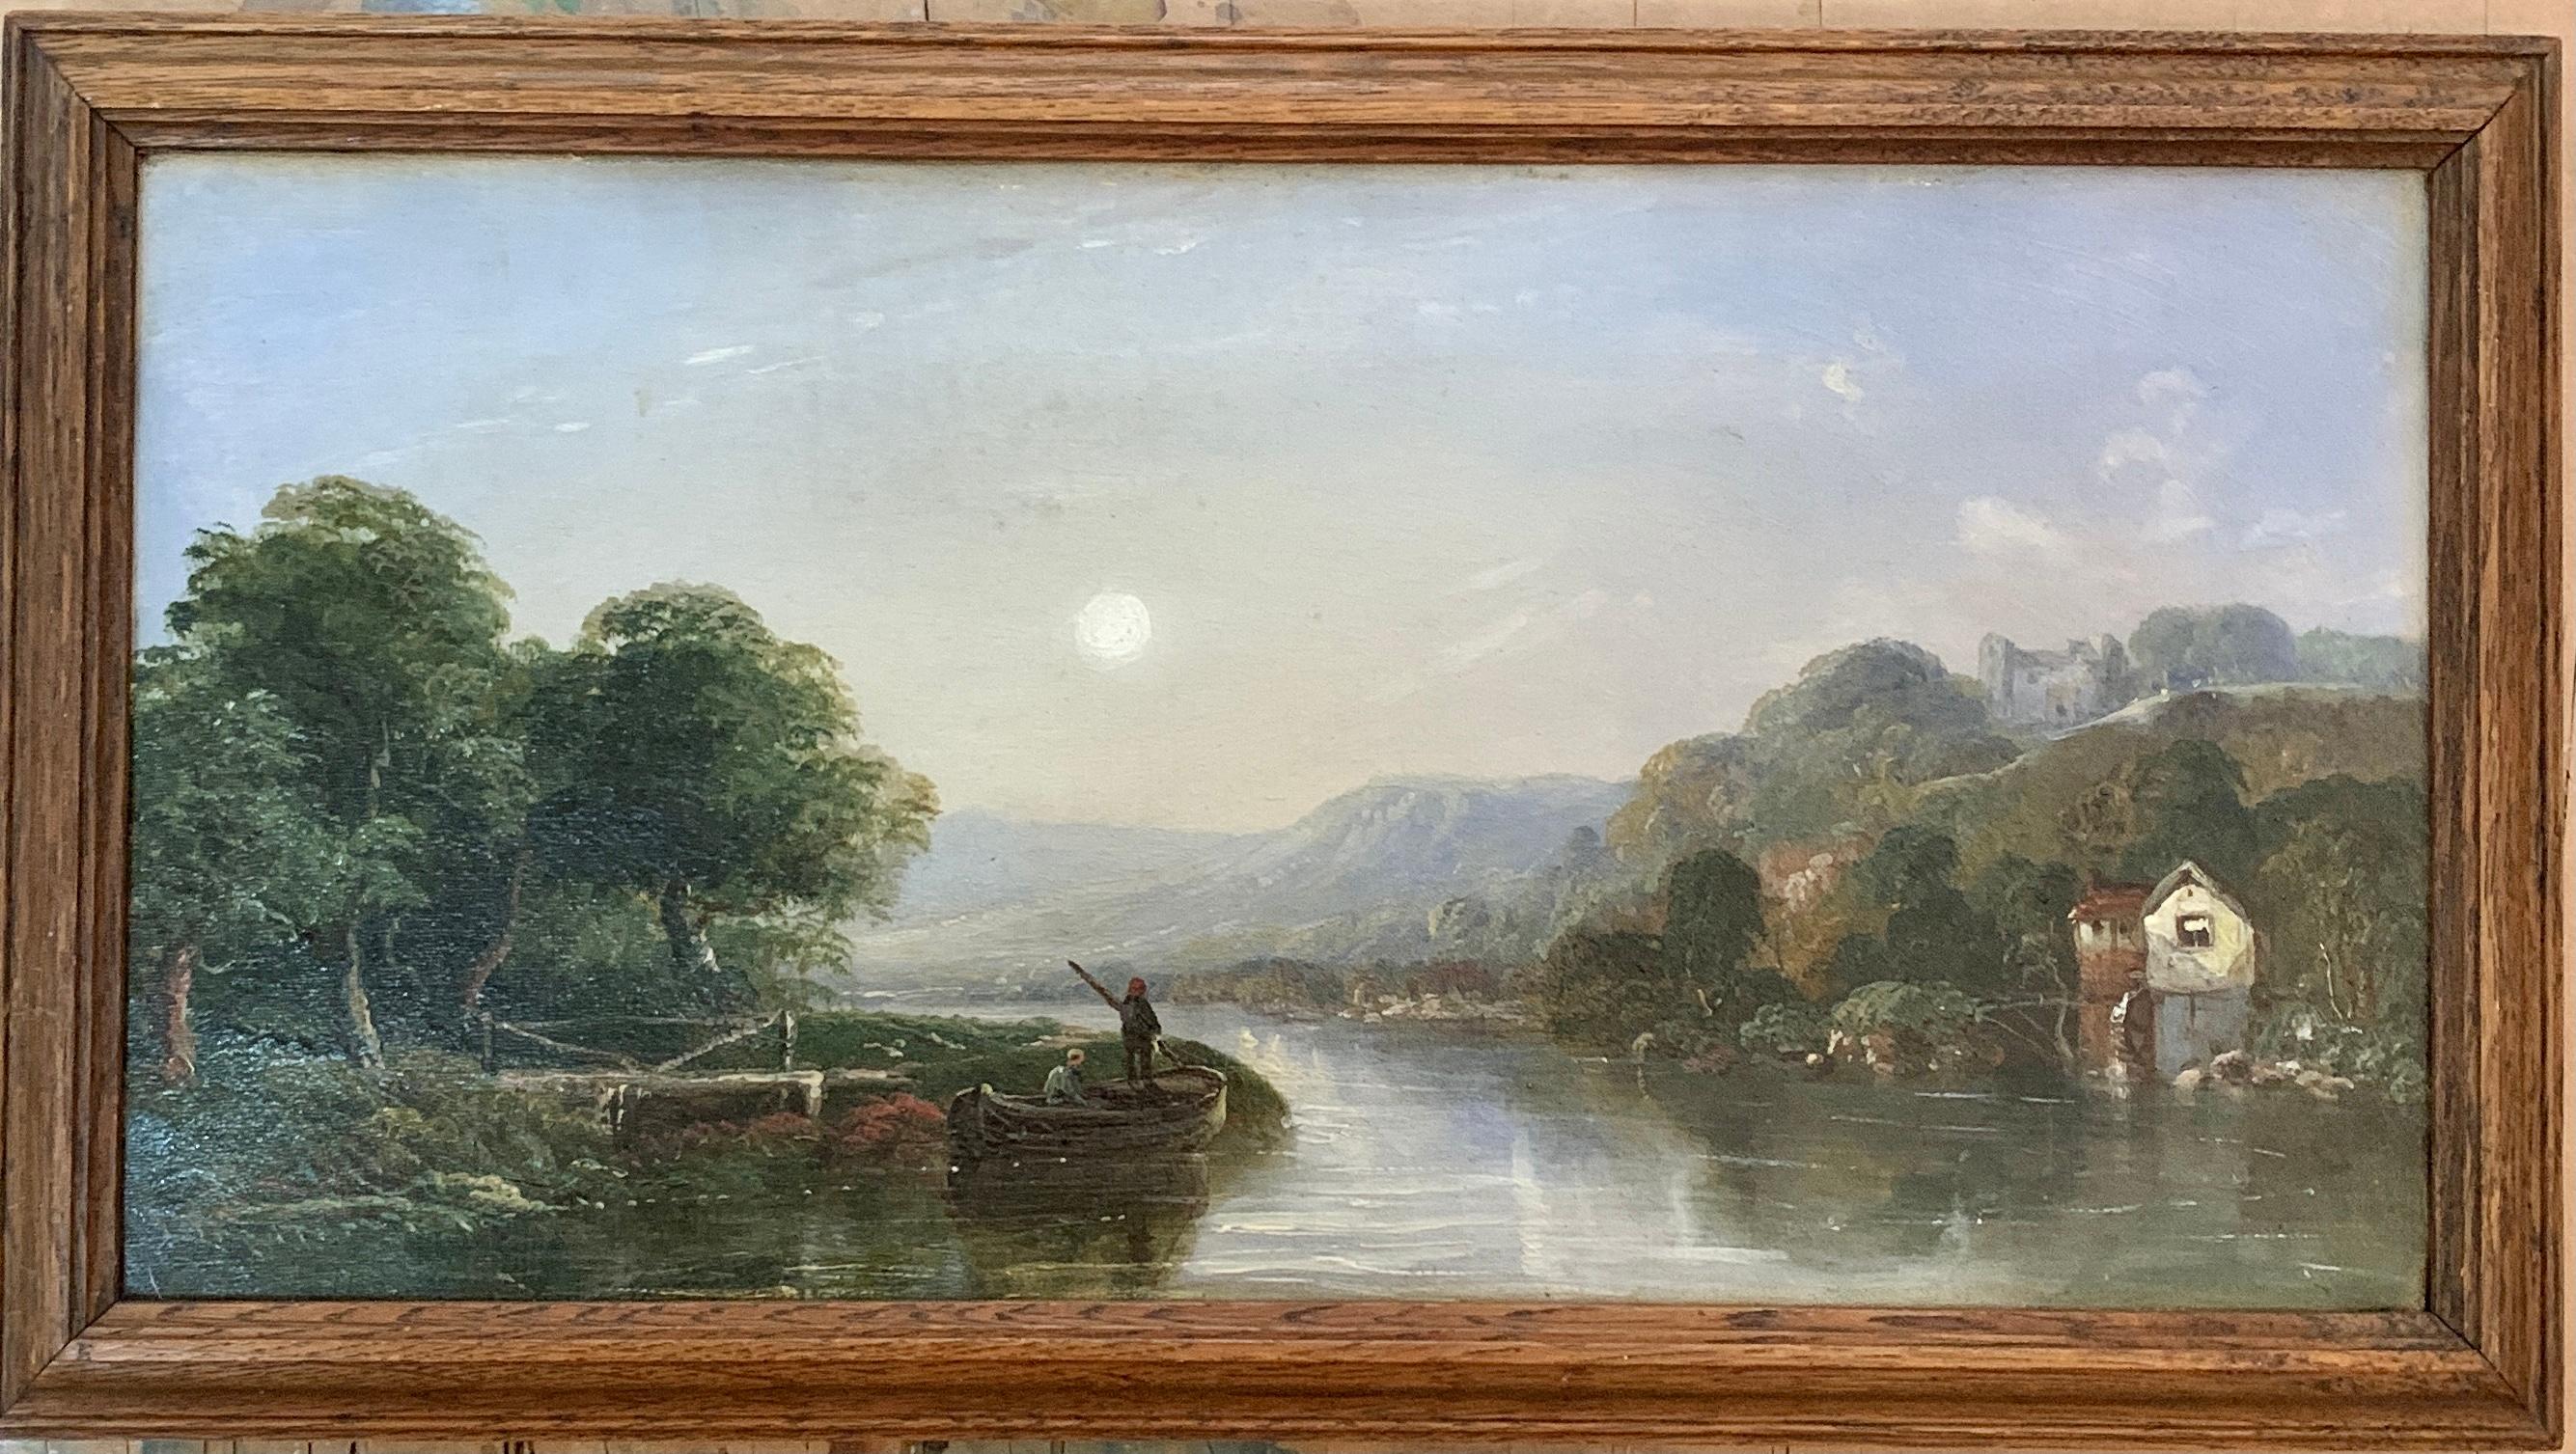 Victorian 19th century Moonlight landscape with river, fishermen and a watermill